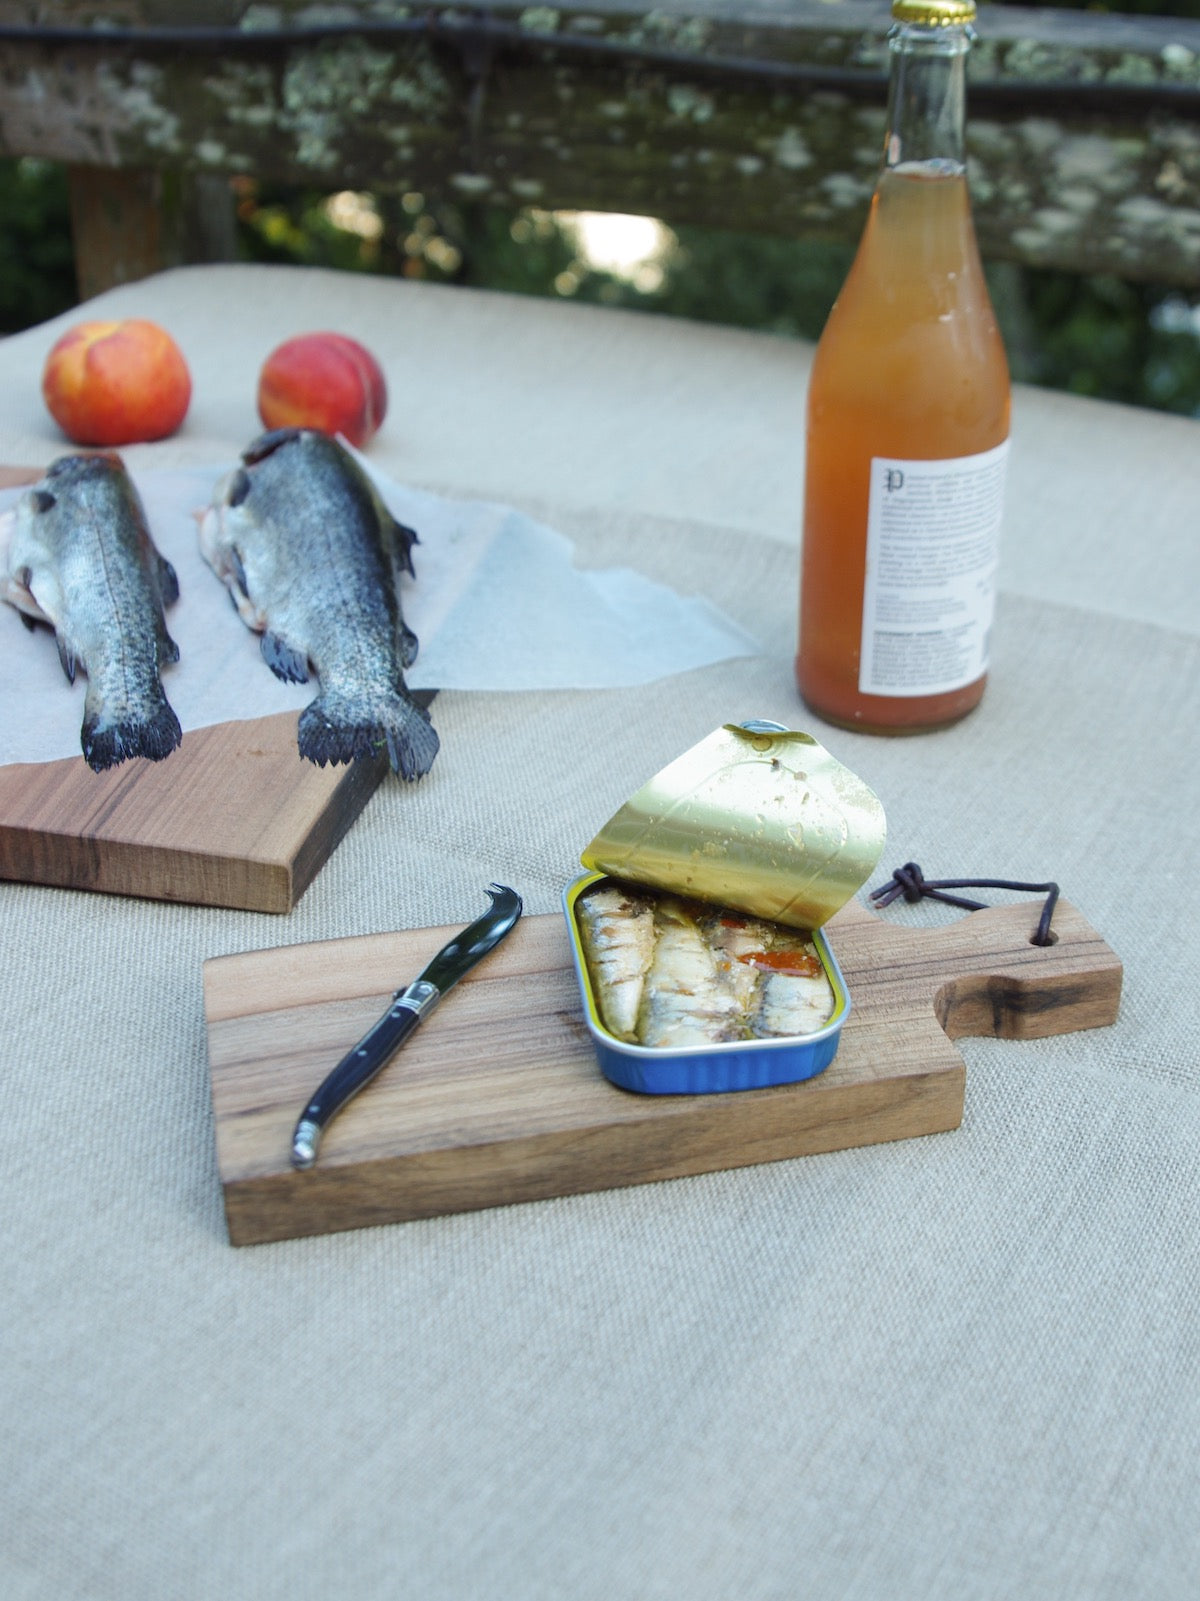 Small wooden cutting boards with sardines and knife on top.